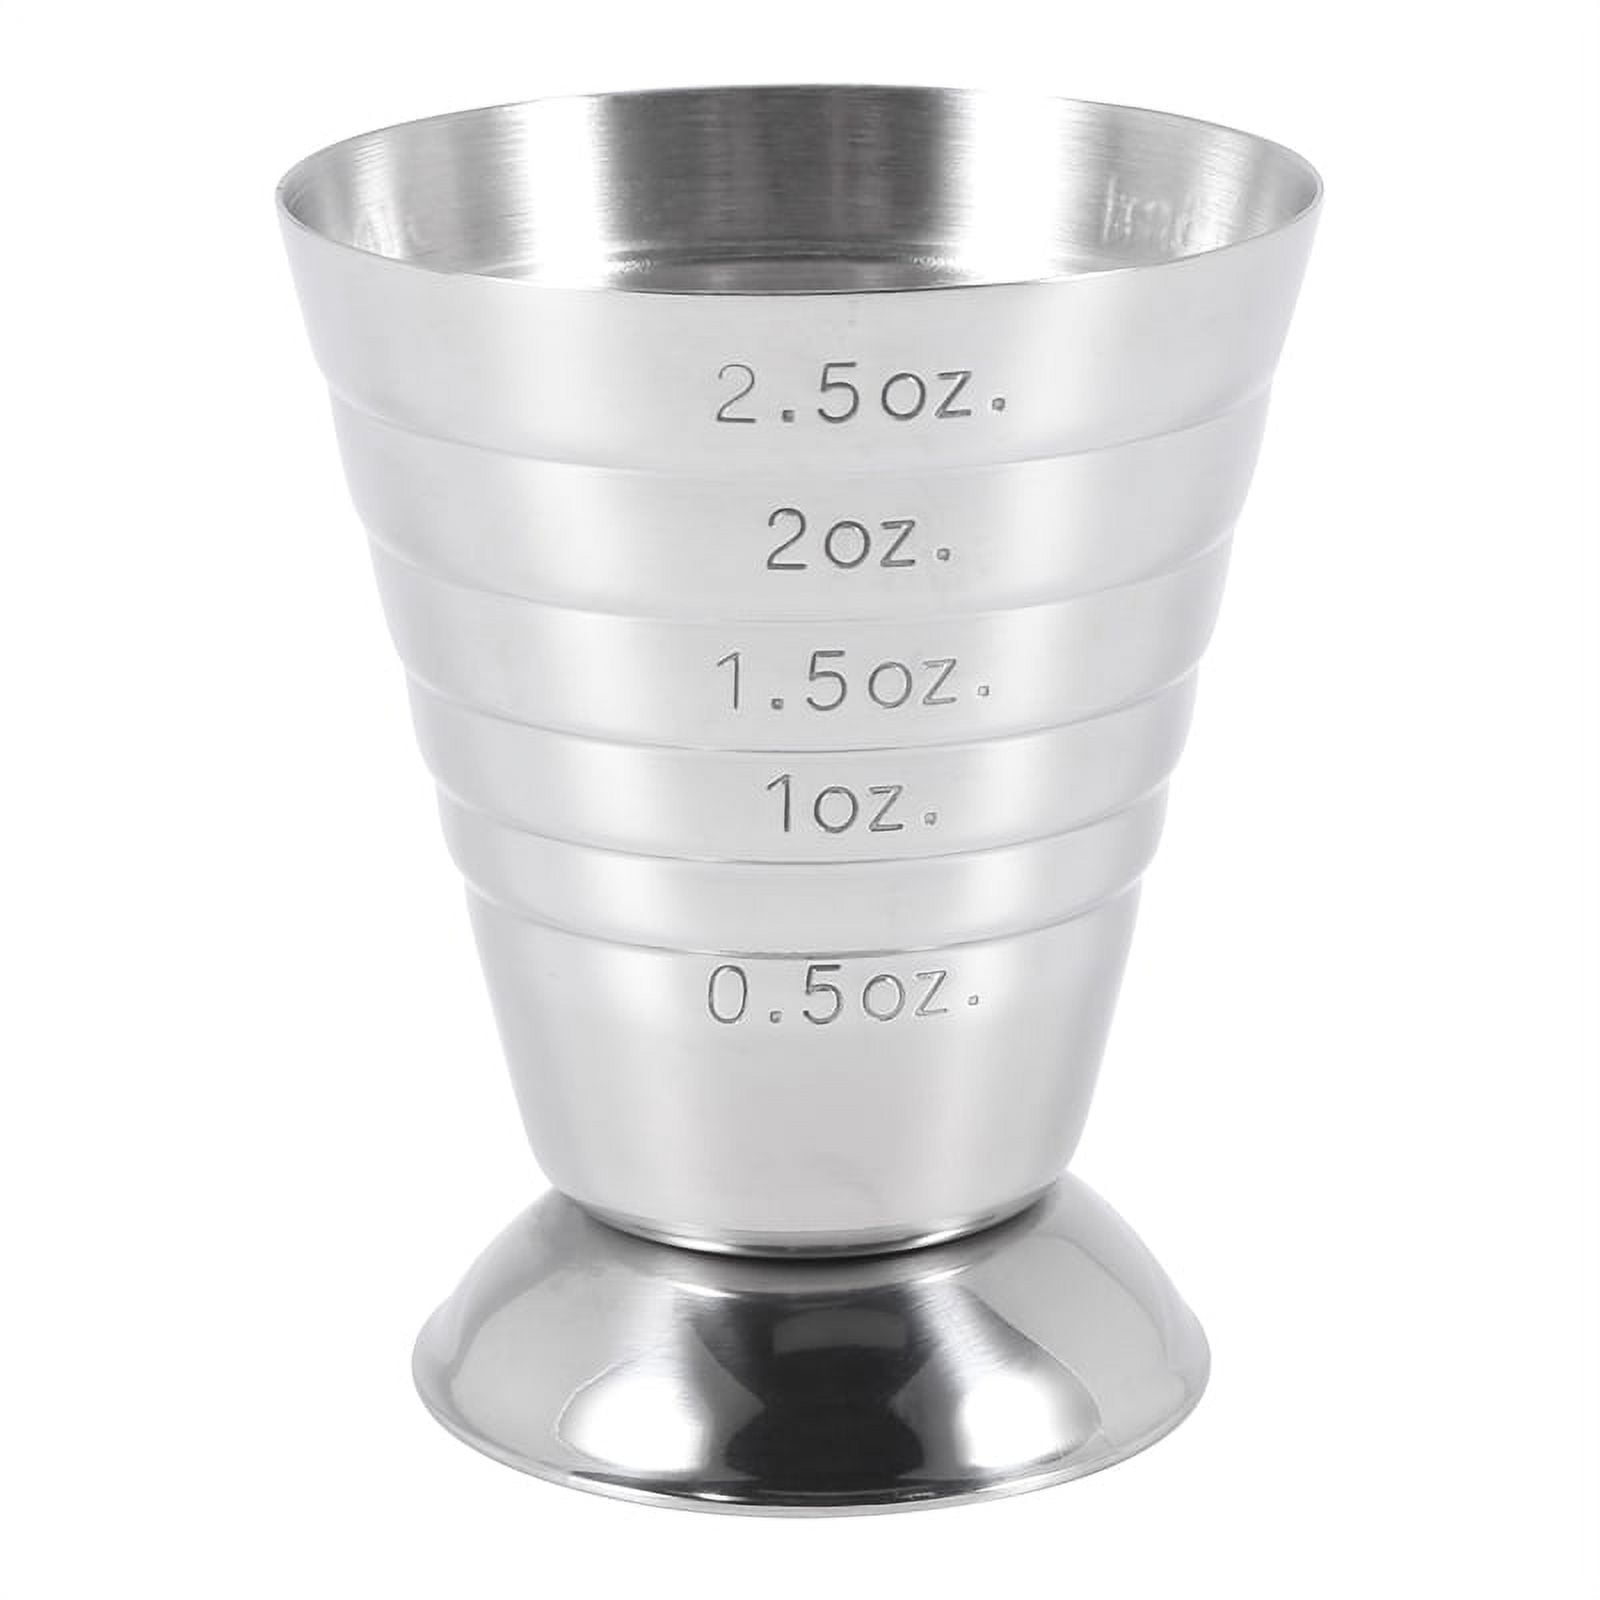 LNKOO Measuring Cup Cocktail Jigger Stainless Steel Graduated Cup, 2.5 oz,  75 ml, 5 Tbsp, for Liquid or Dry Mini Espresso Shot Cup